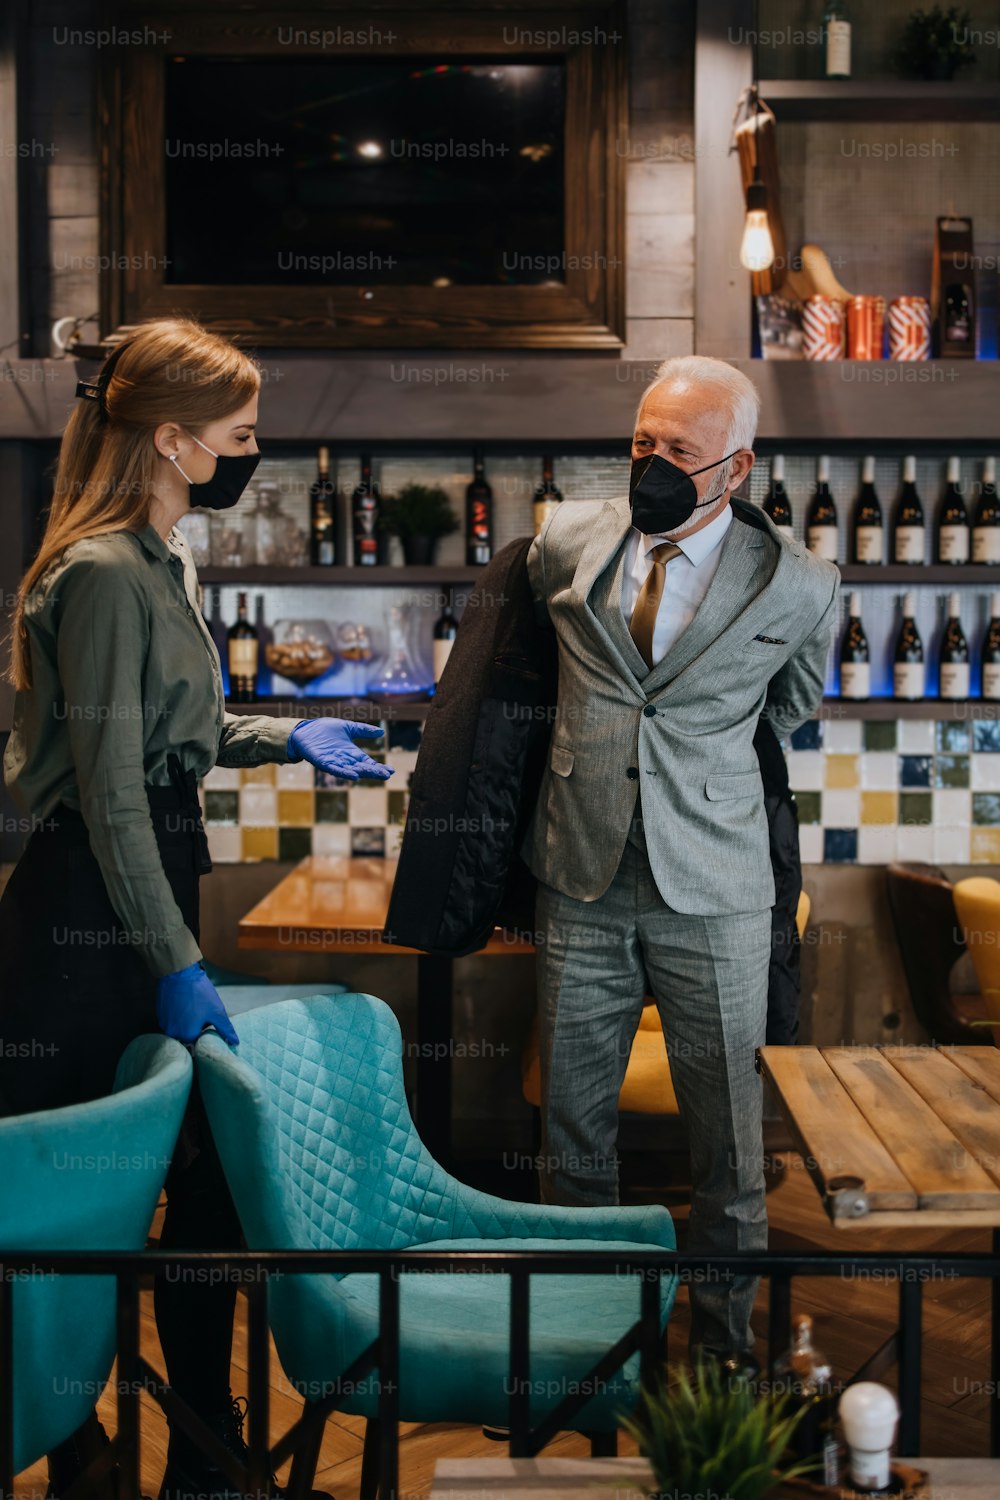 Confident senior businessman standing in exclusive restaurant. He takes off his coat while the waitress helps him. They both wearing protective face masks against virus infection.